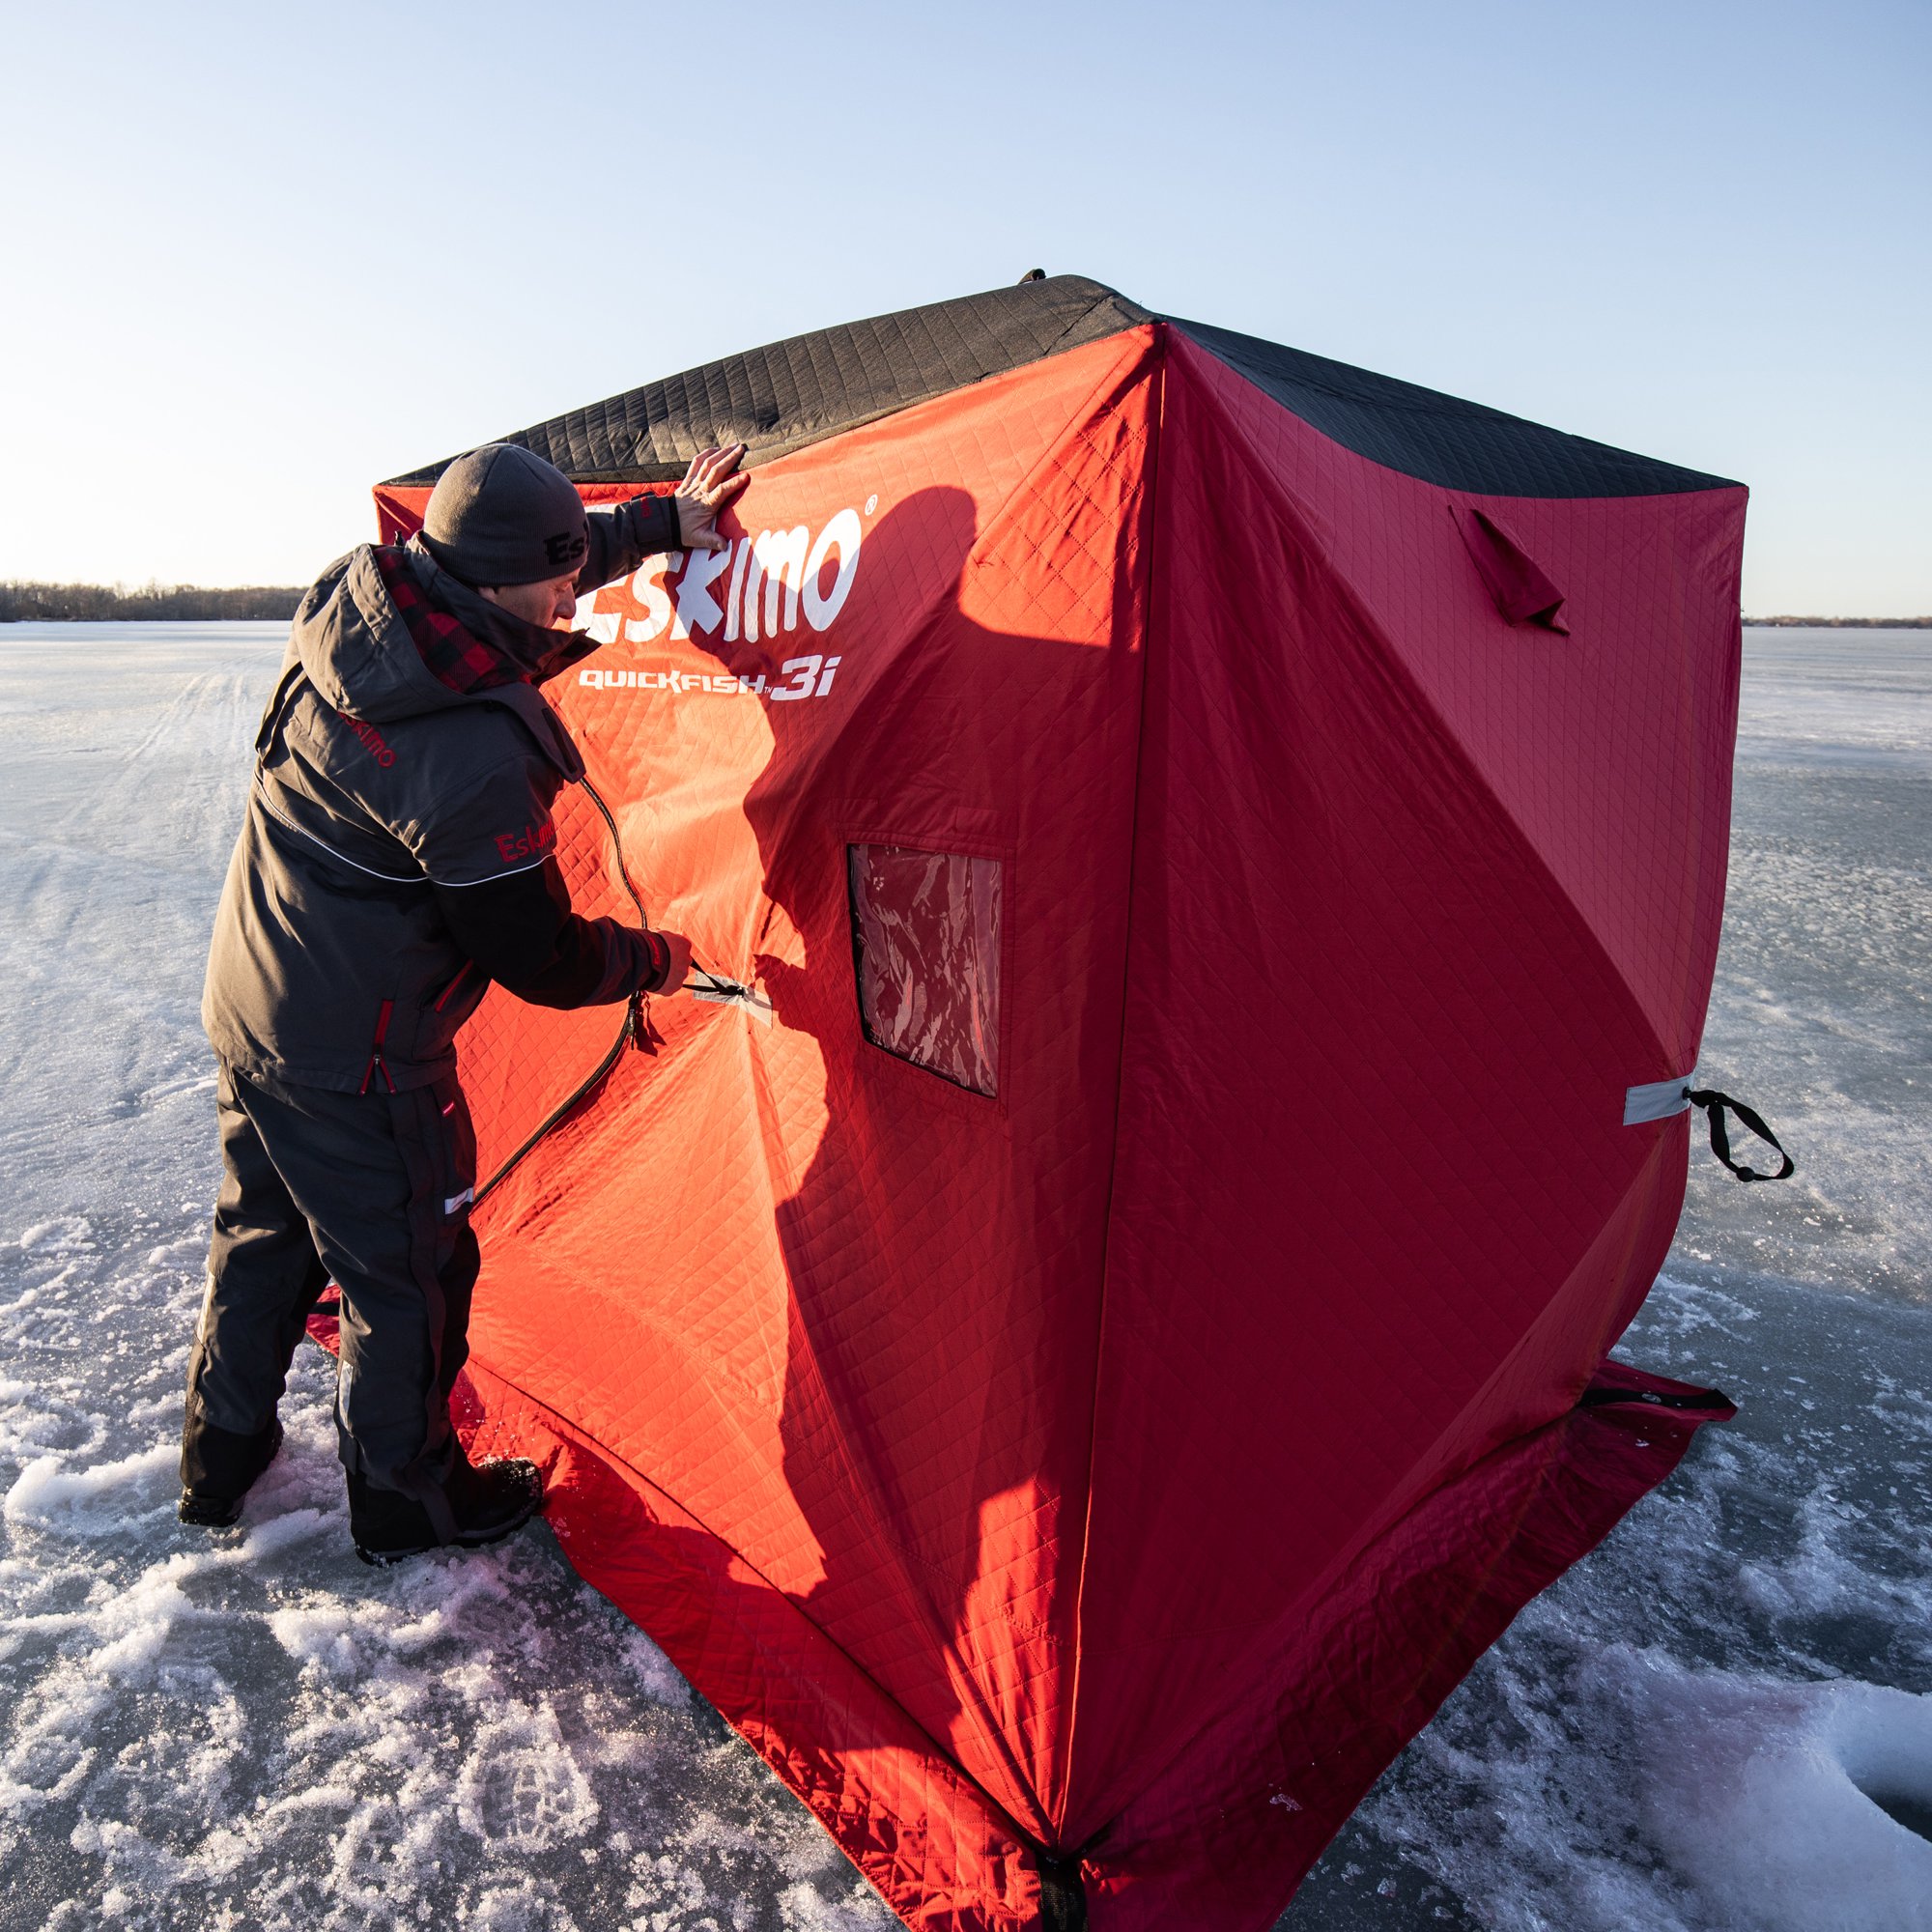 A man setting up the Eskimo 69445 Quickfish 3i Portable Insulated Pop-Up Ice Fishing Shelter, 3 Person on the ice.